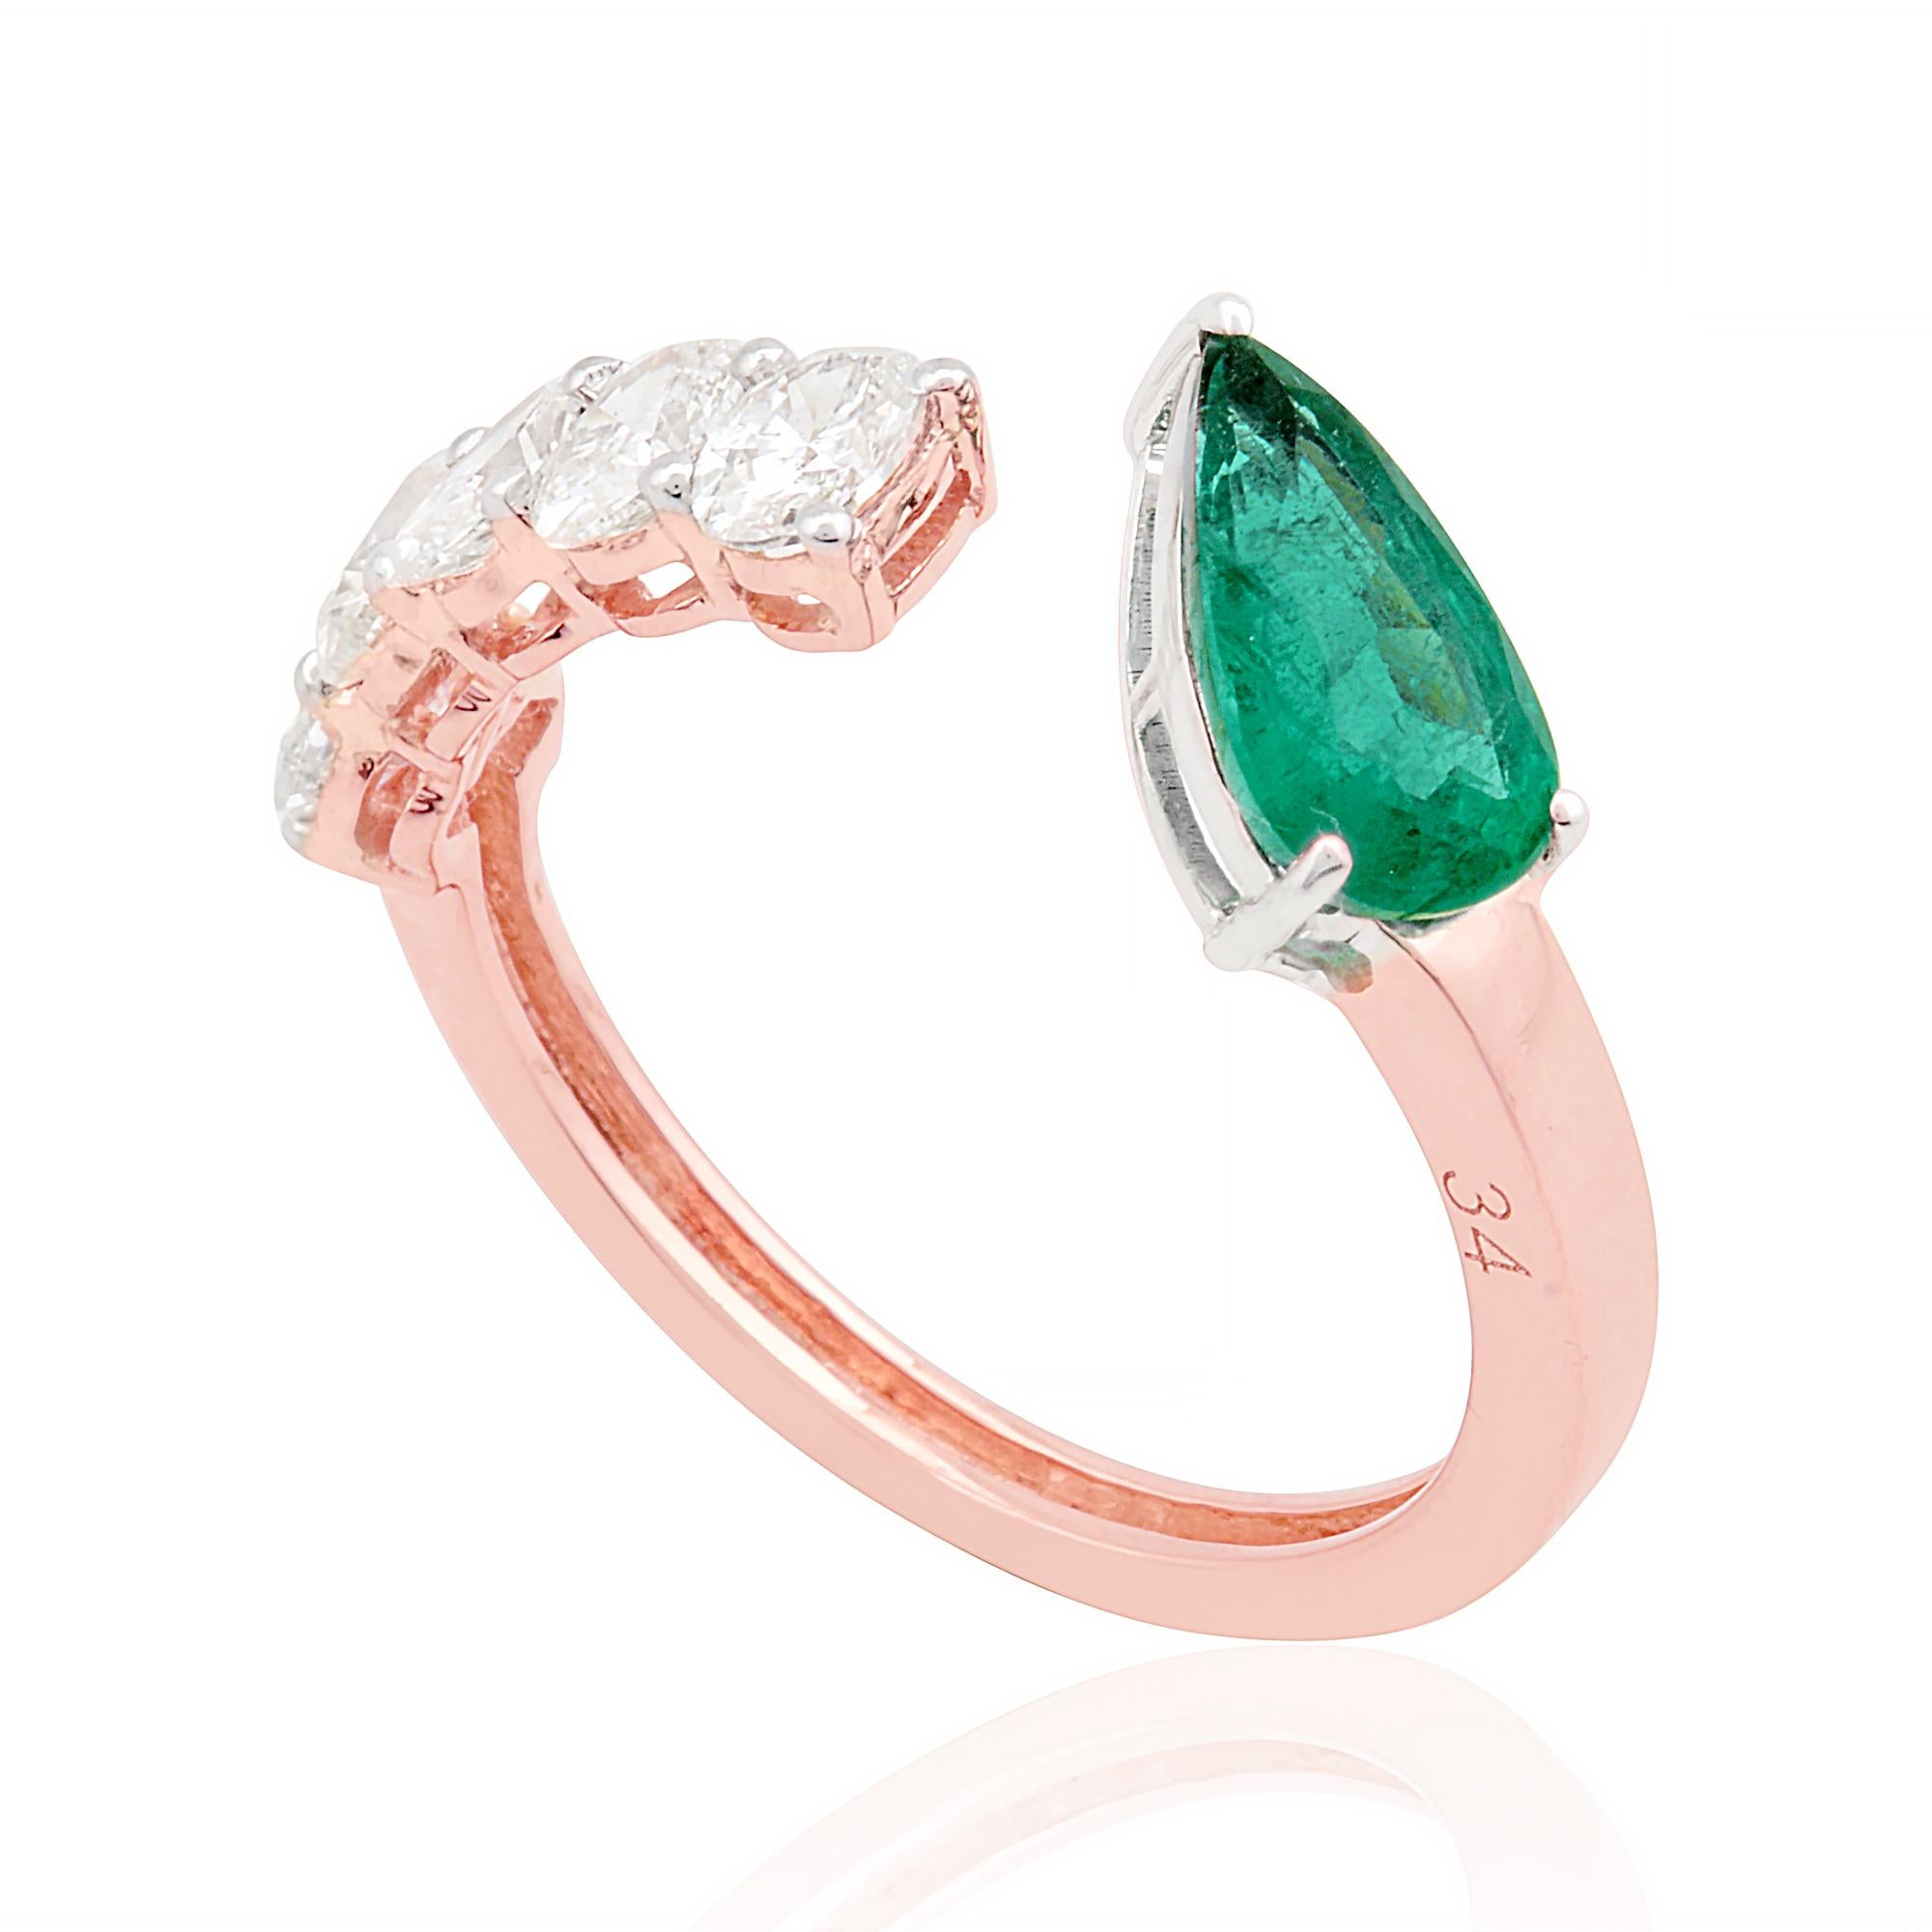 For Sale:  Natural Emerald Gemstone Cuff Band Ring Diamond Solid 18k Rose Gold Fine Jewelry 3